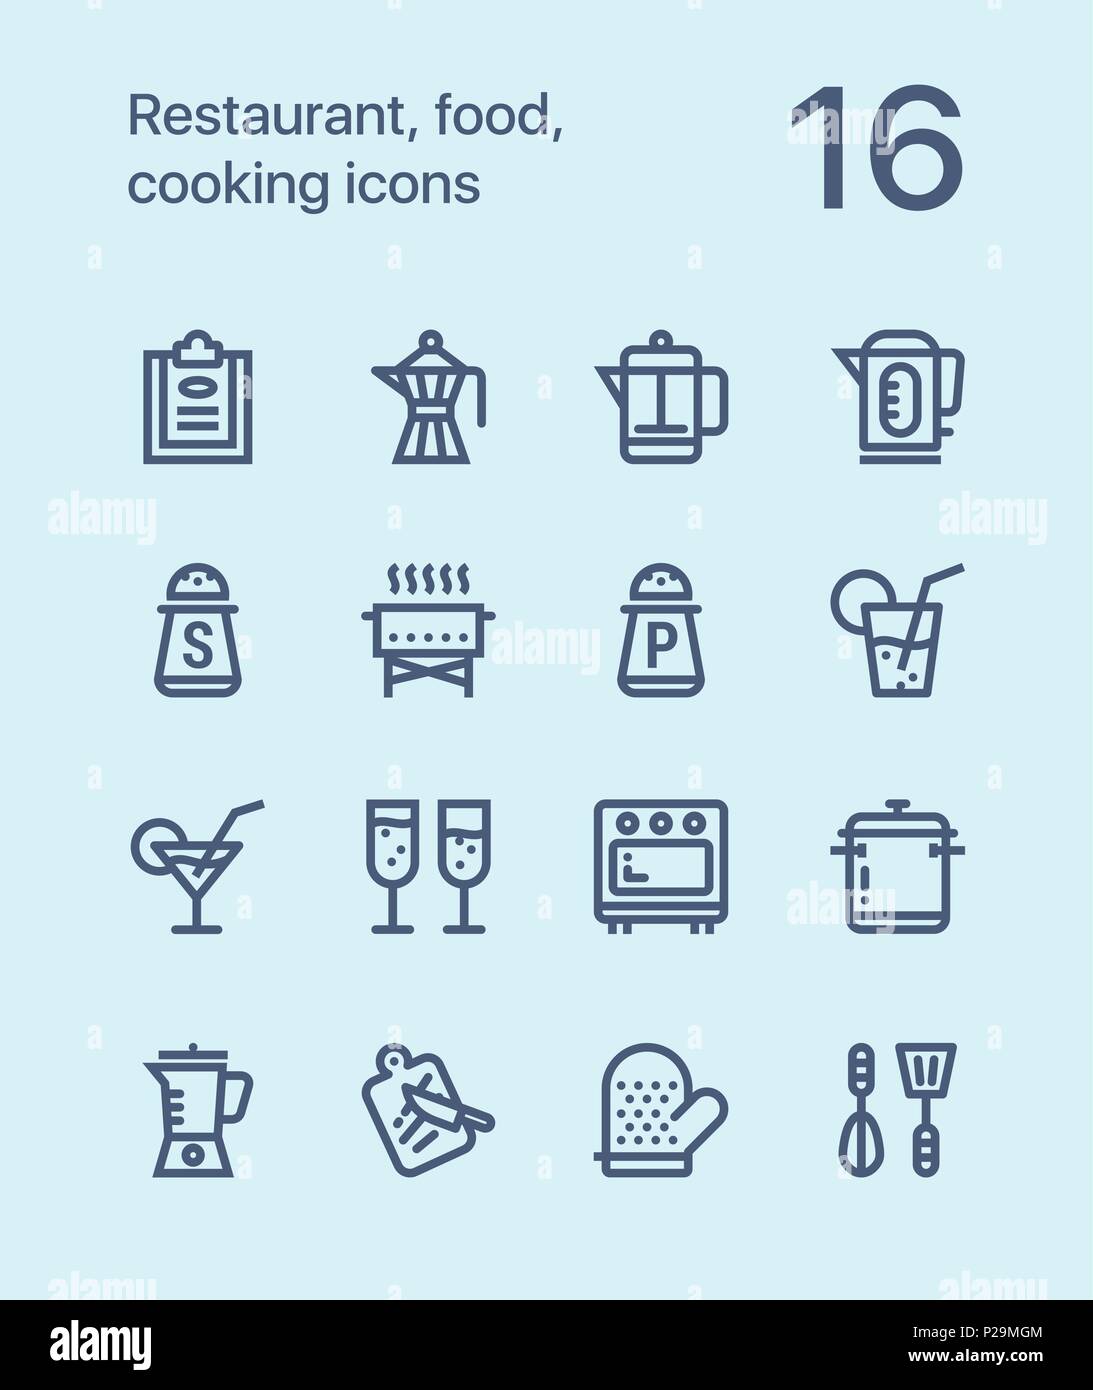 Outline Restaurant, food, cooking icons for web and mobile design pack 2 Stock Vector